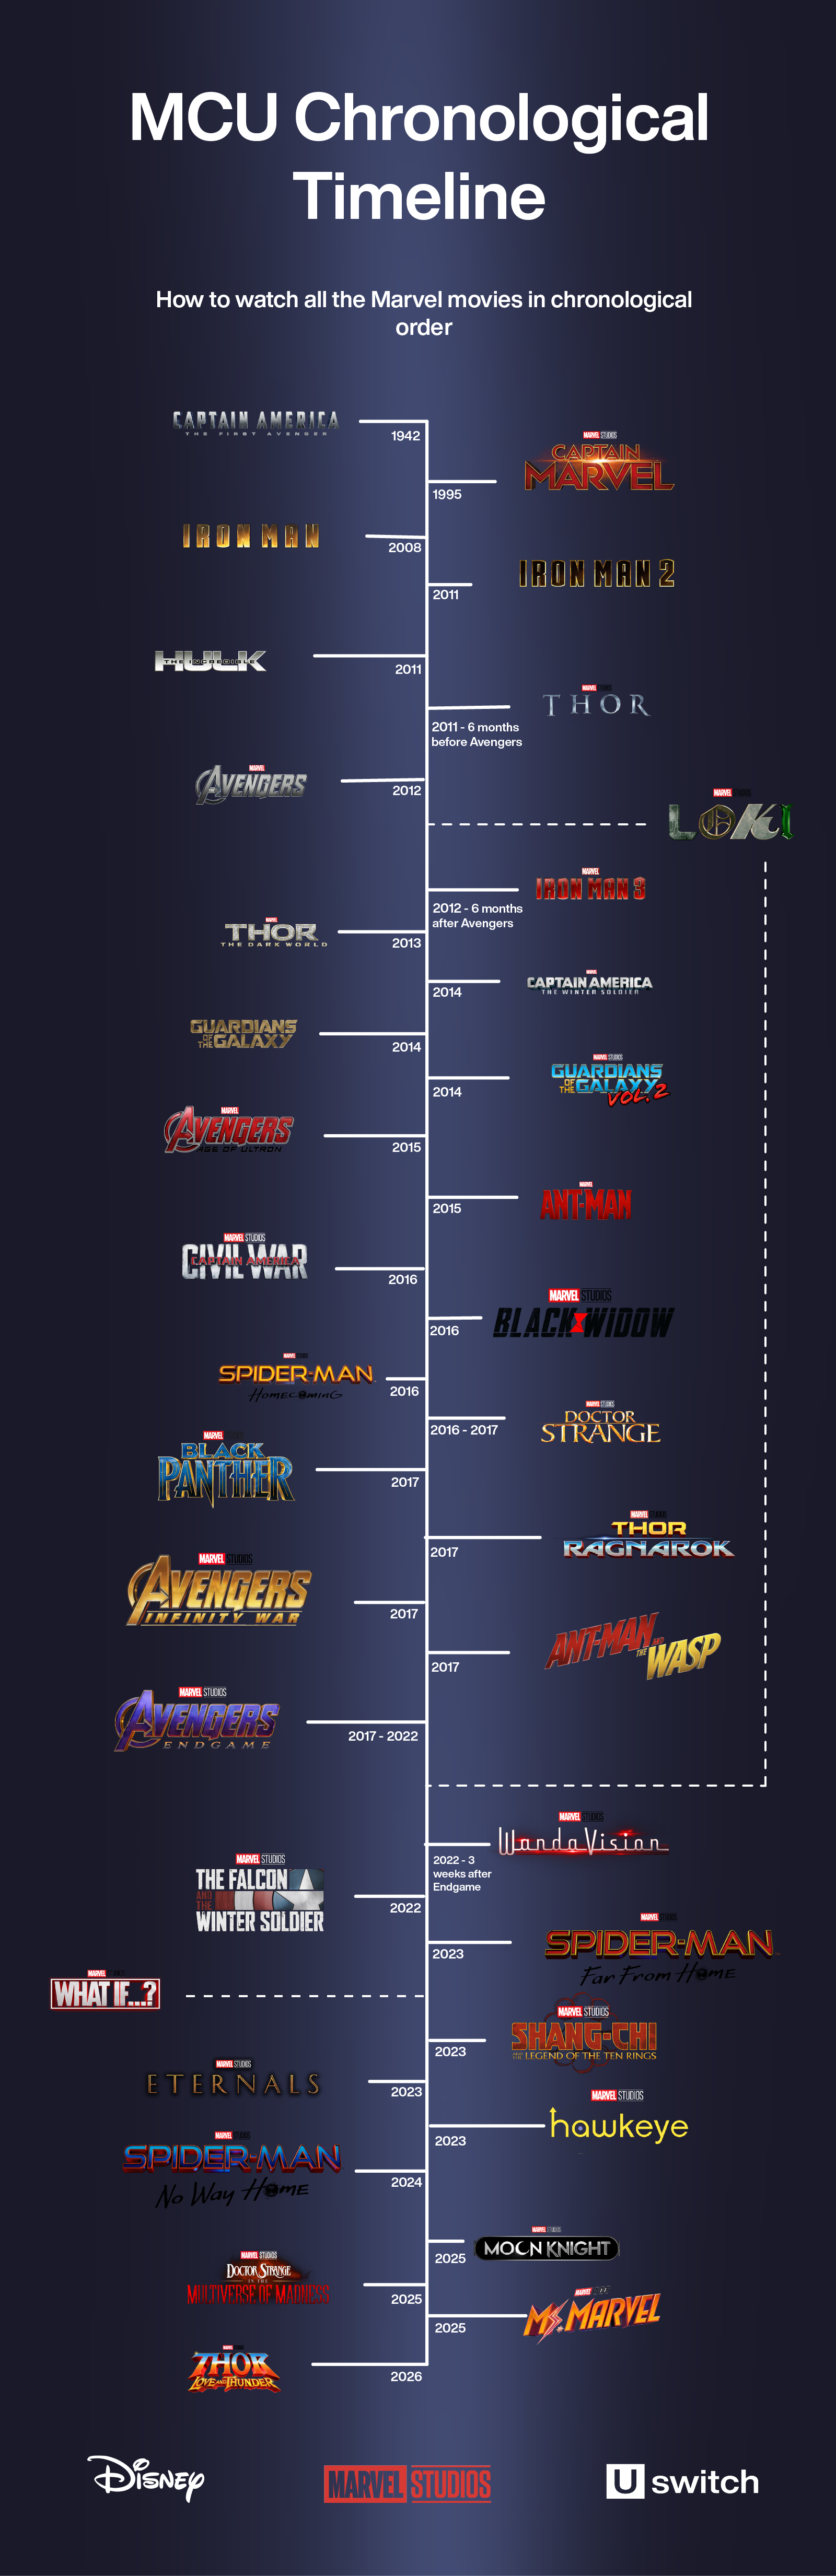 Mcu Timeline Watch The Marvel Movies In Order Uswitch Vlr Eng Br